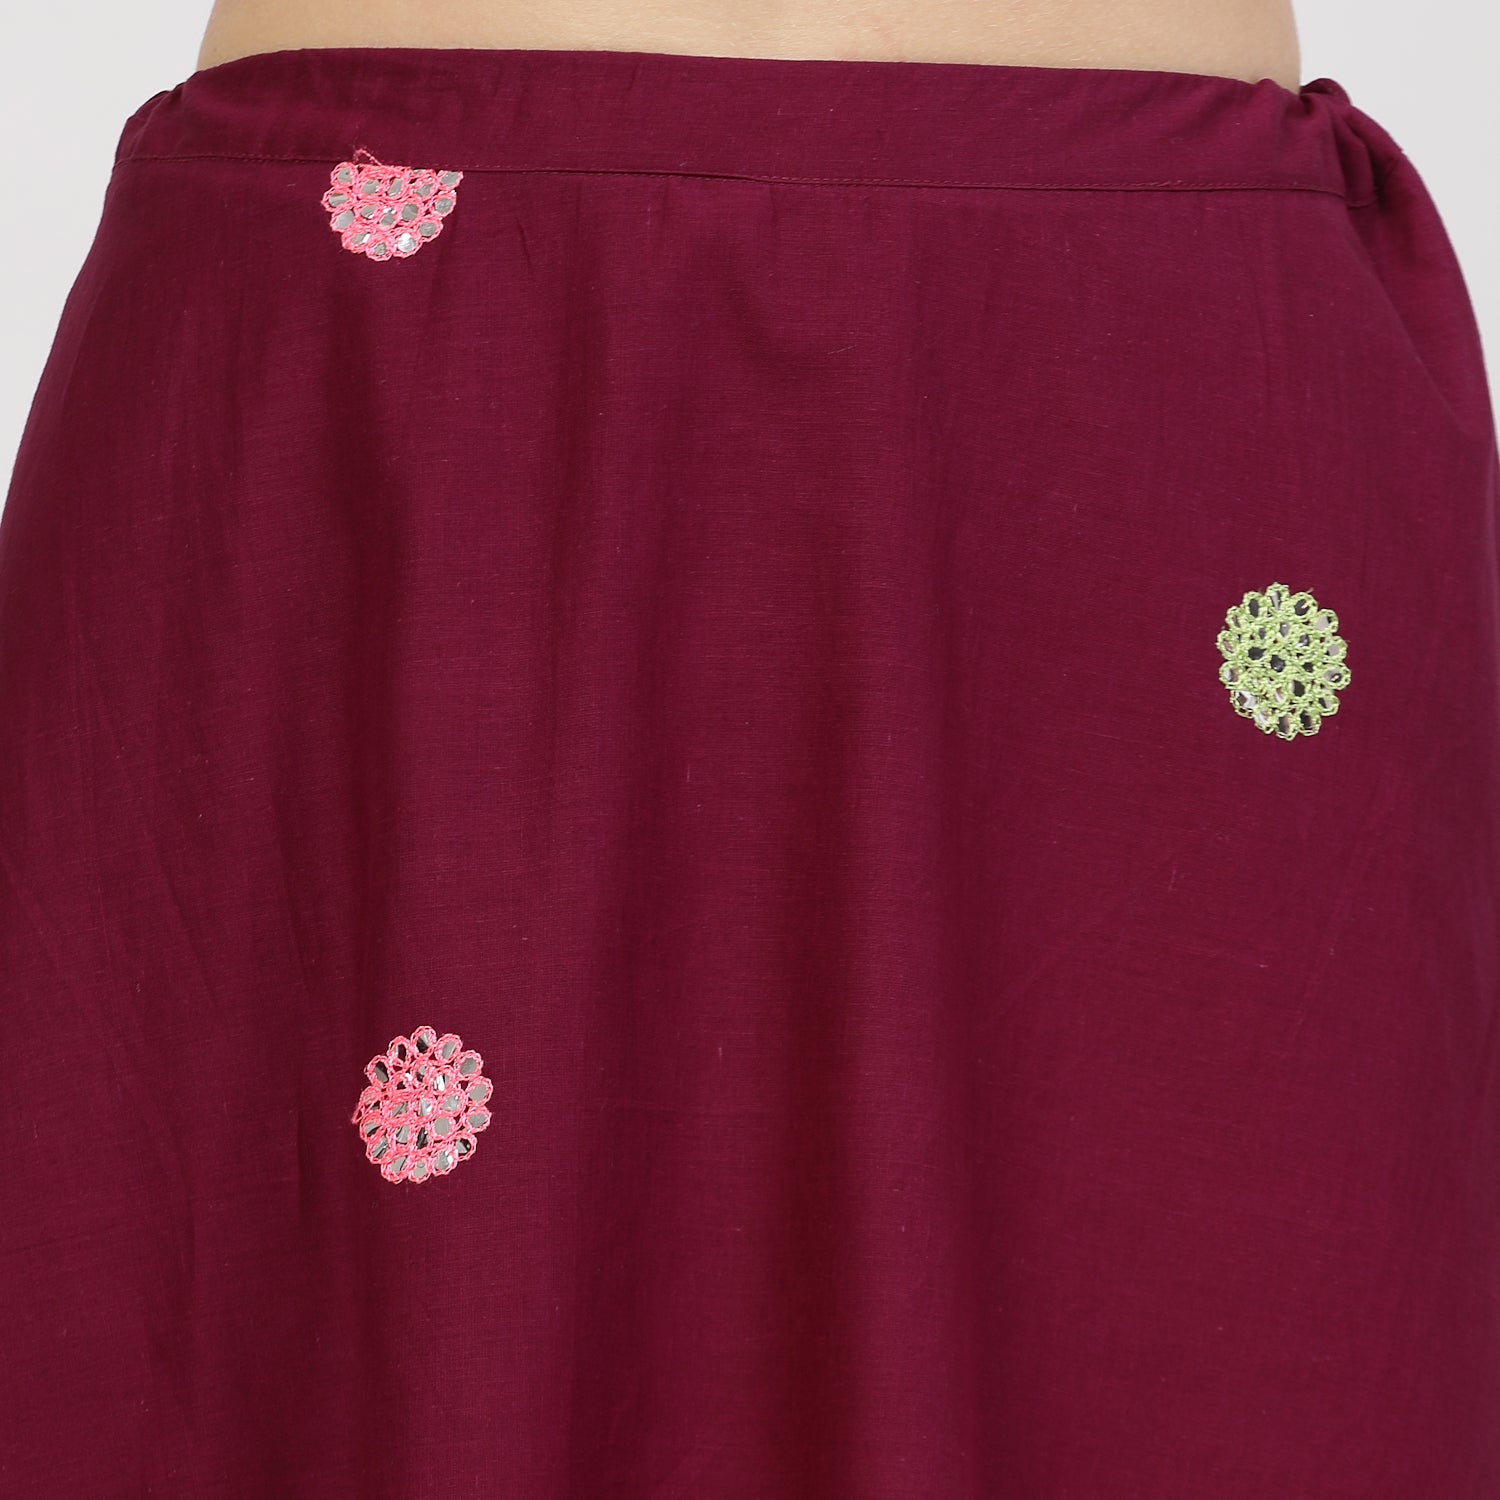 Purple Asymmetrical Skirt With Mirror Embroidery